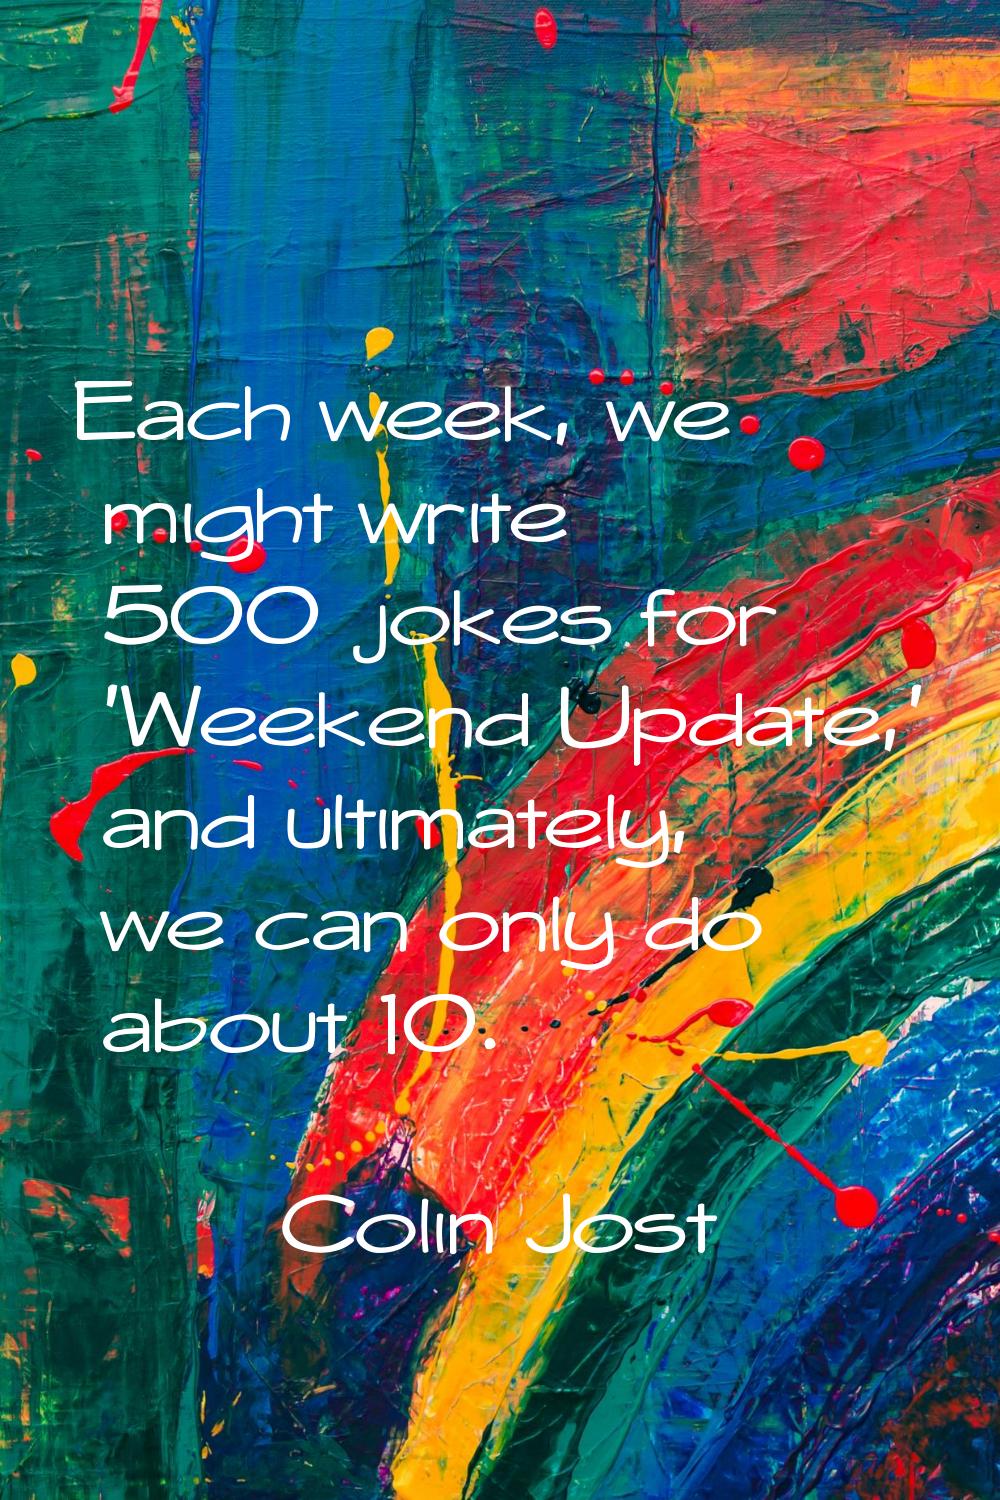 Each week, we might write 500 jokes for 'Weekend Update,' and ultimately, we can only do about 10.